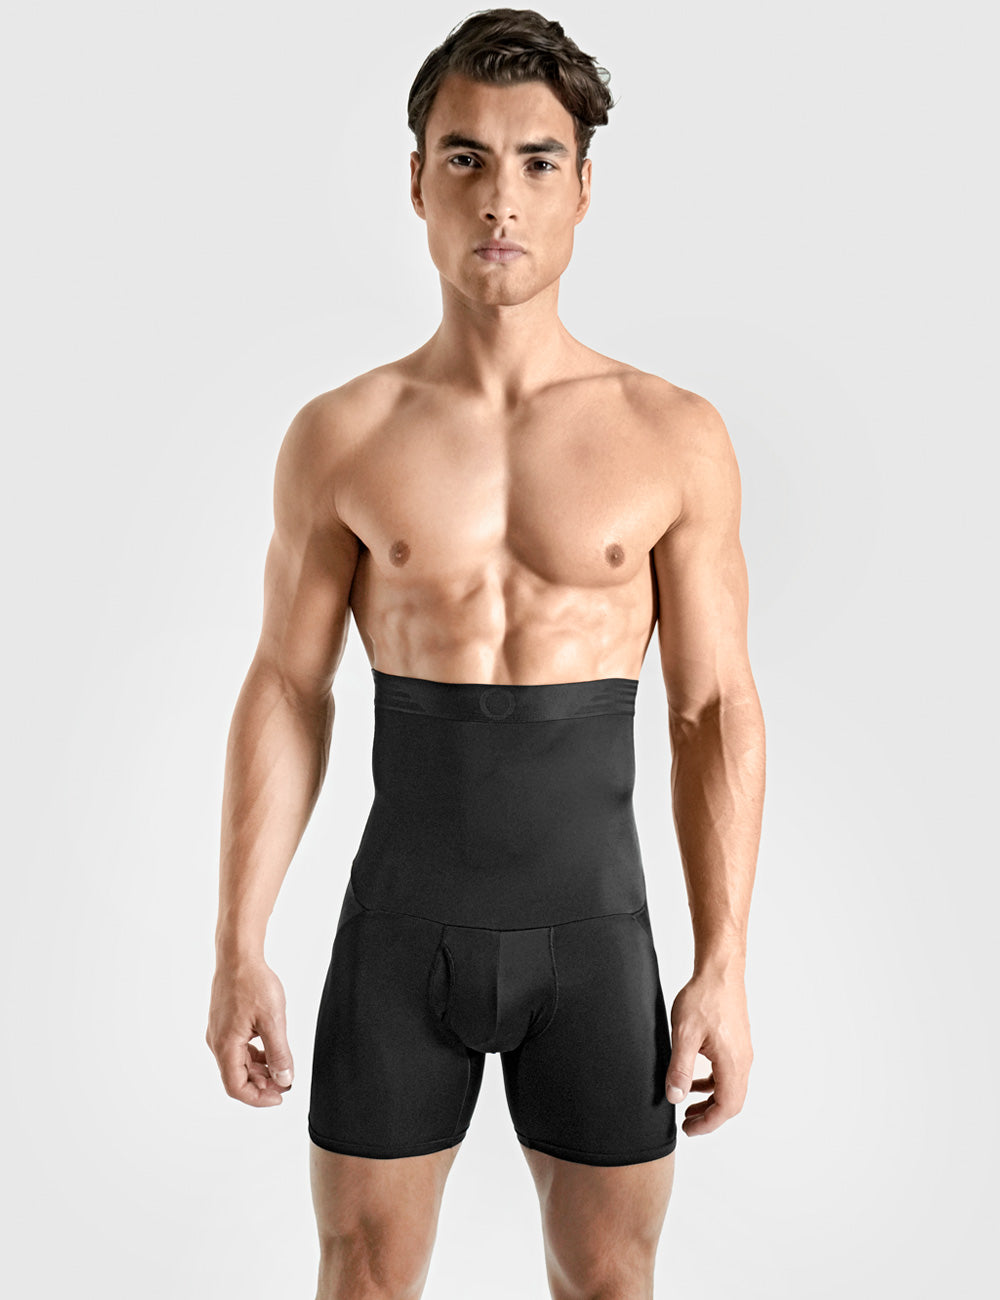 Mens Slimming Full Body Shaper With Butt Pad Compression Tummy